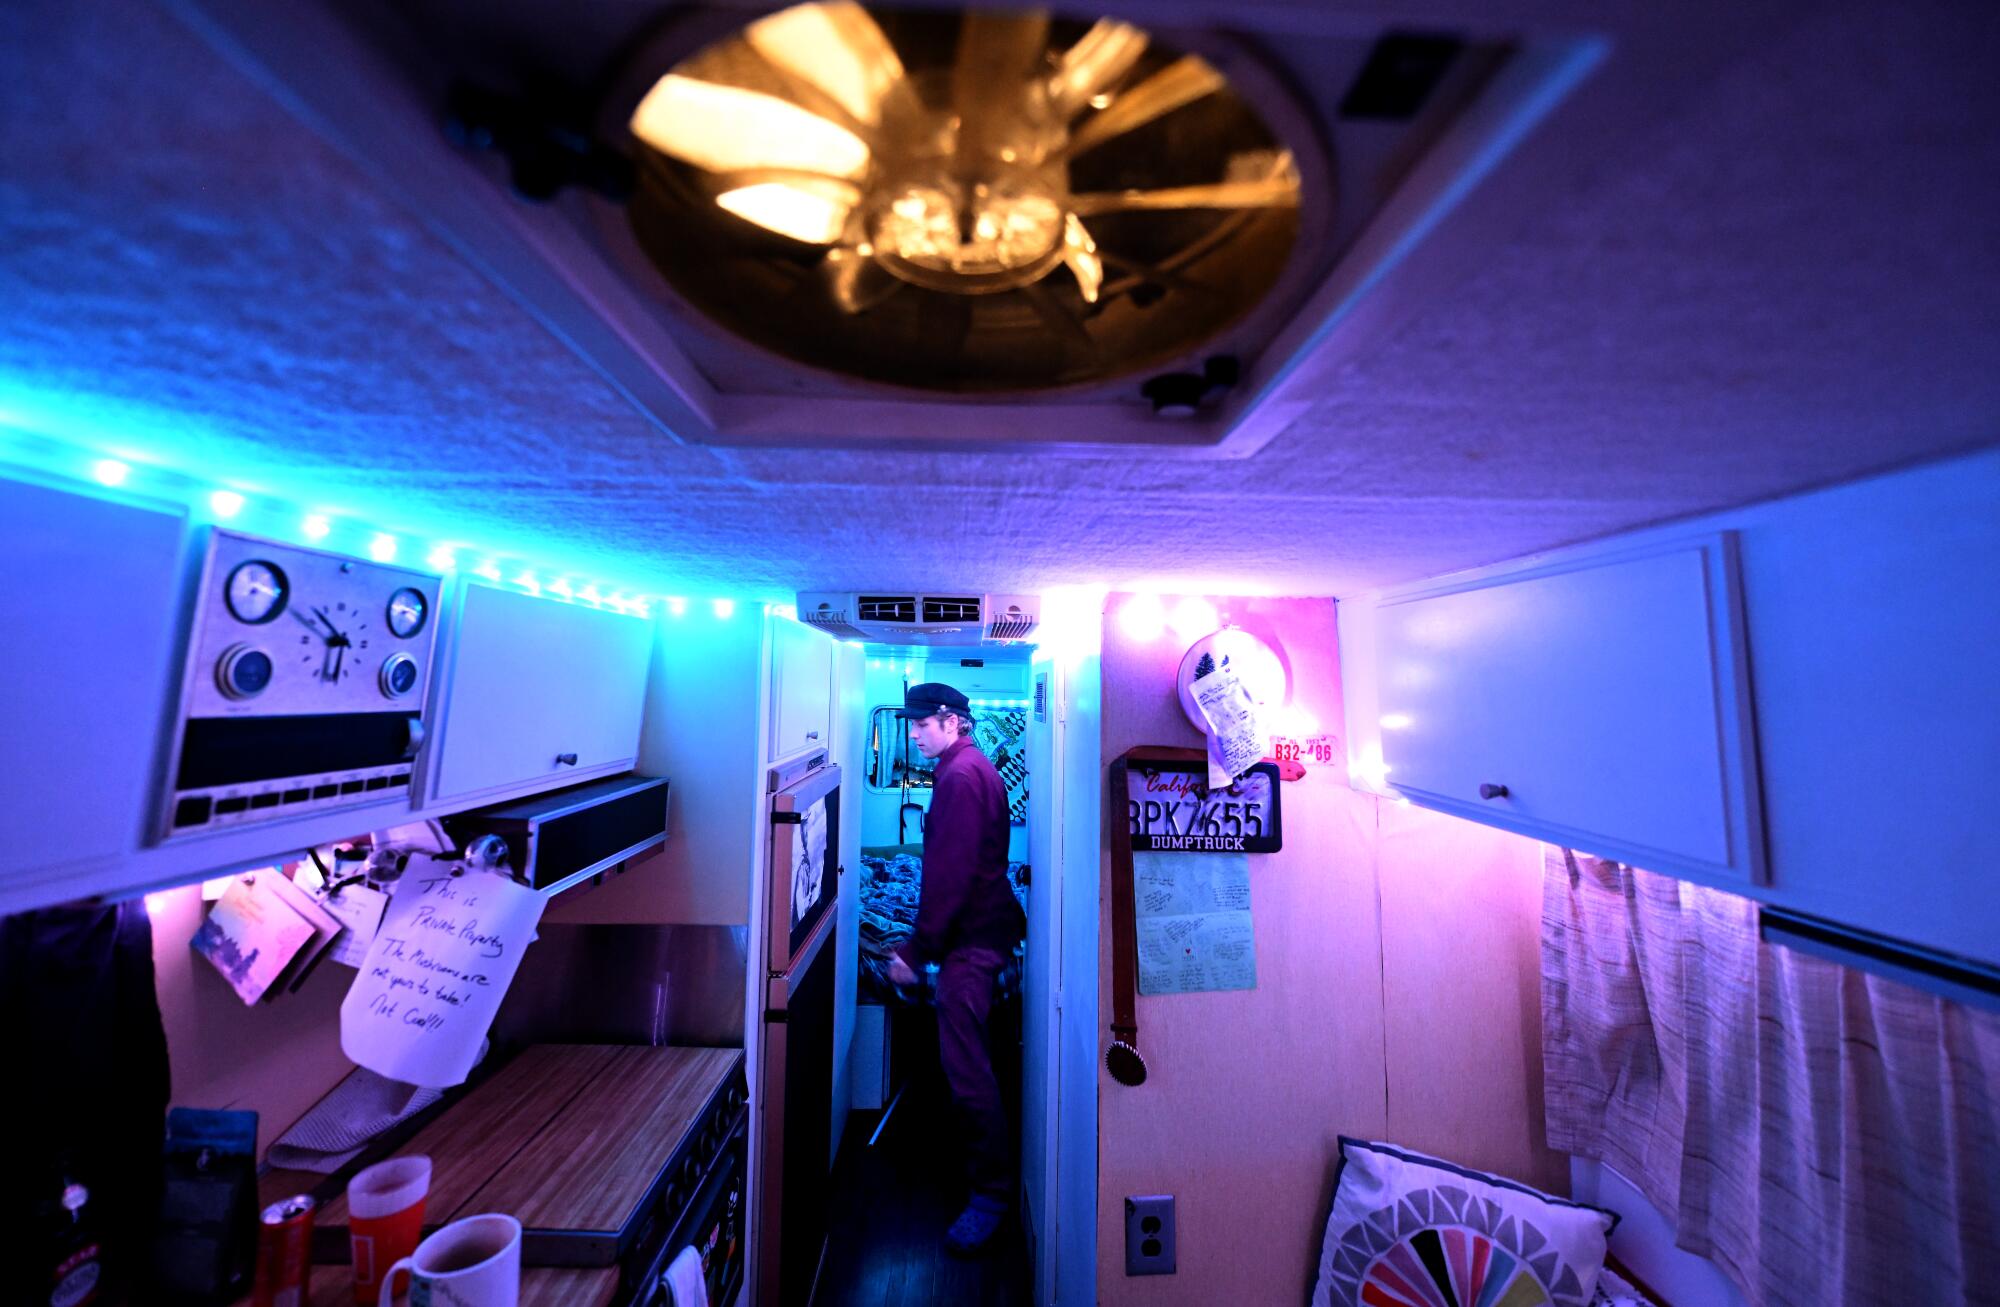 A person inside a recreational vehicle with pink and blue lighting.